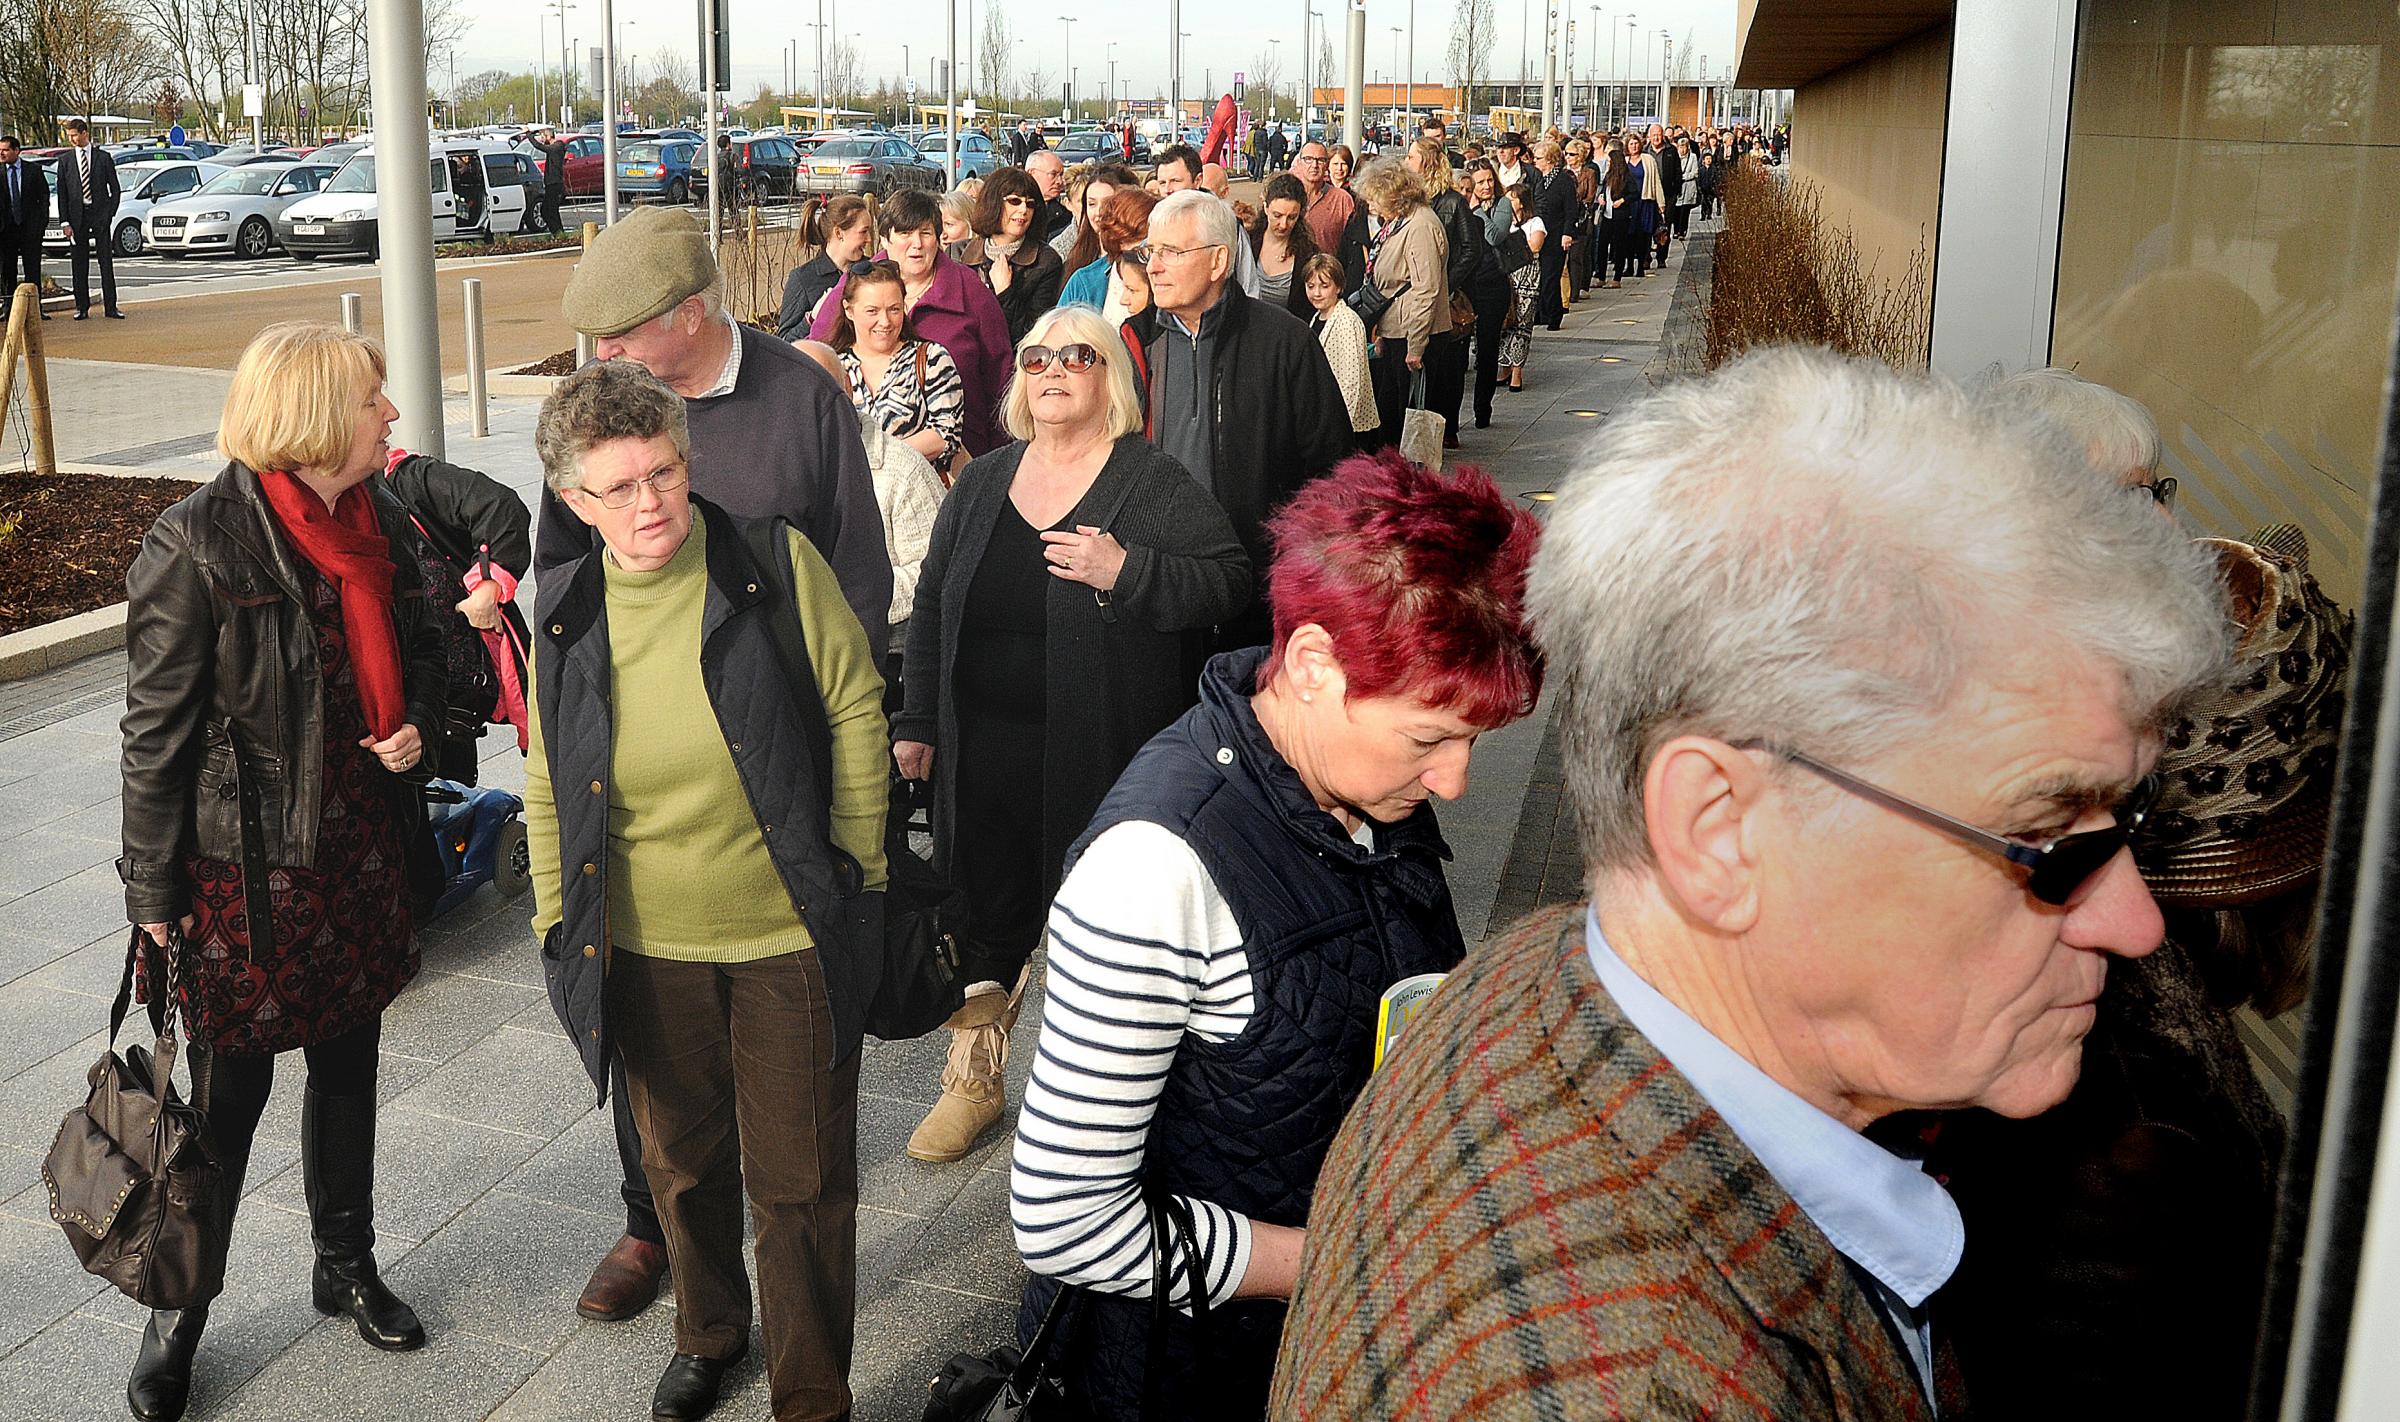 Crowds queue ouside John Lewis at the opening of their new store at the opening of the Vangarde Shopping Park. Picture : Garry Atkinson.